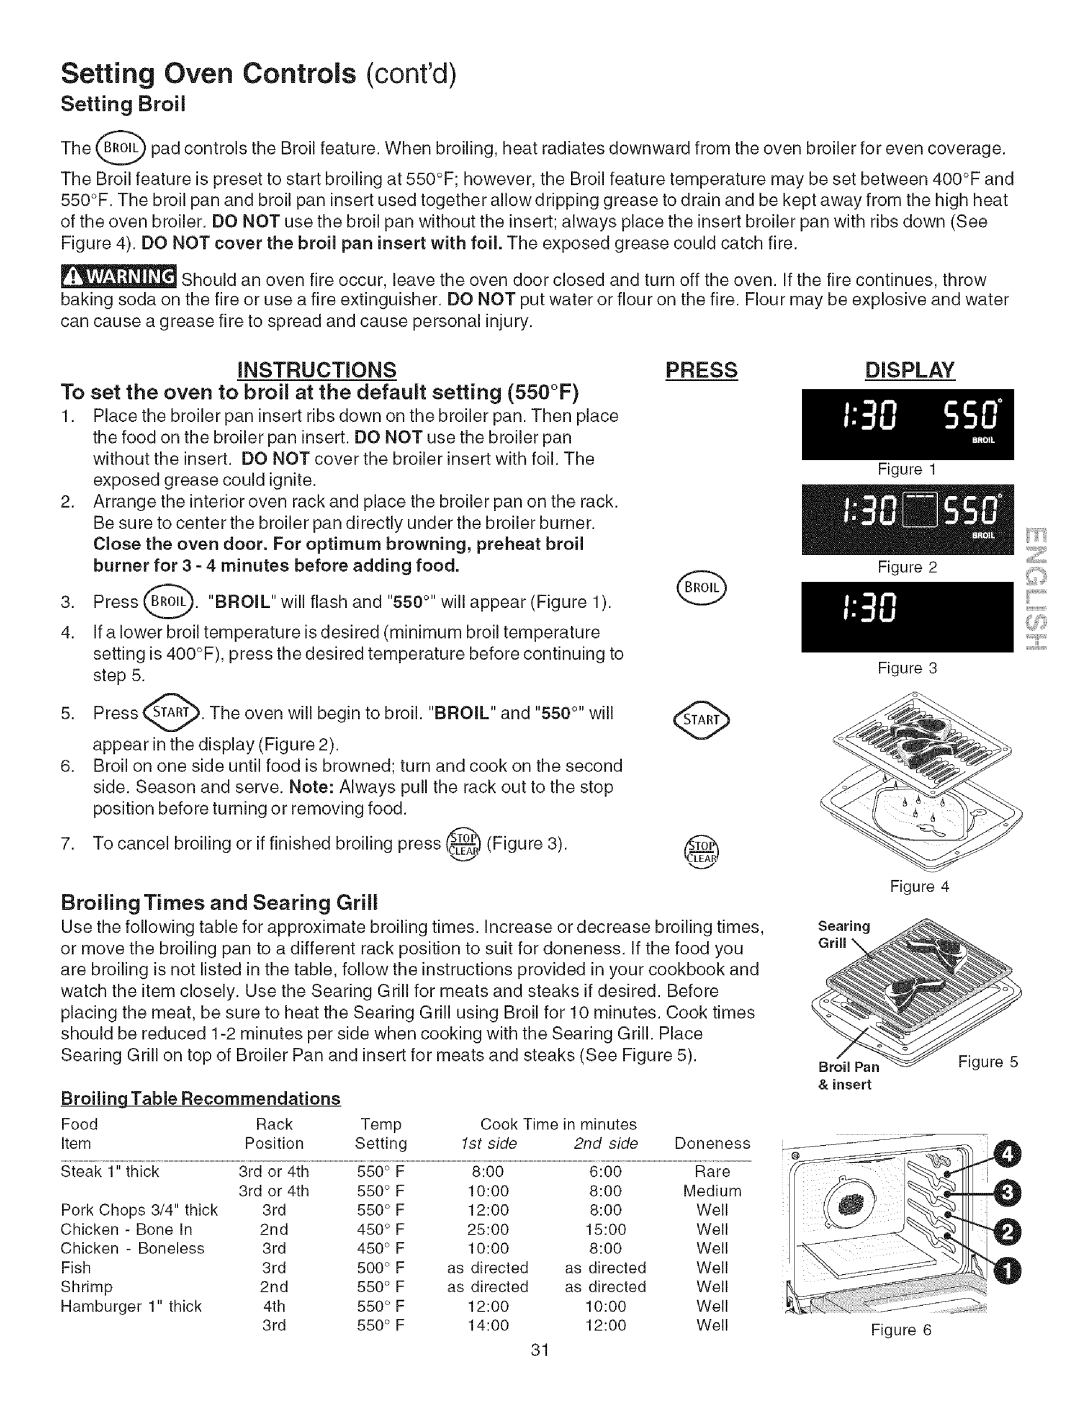 Kenmore 790.3671 manual Setting Oven Controls contd, Setting Broil, Instructions, Press, Display, 1st side, 2nd side 